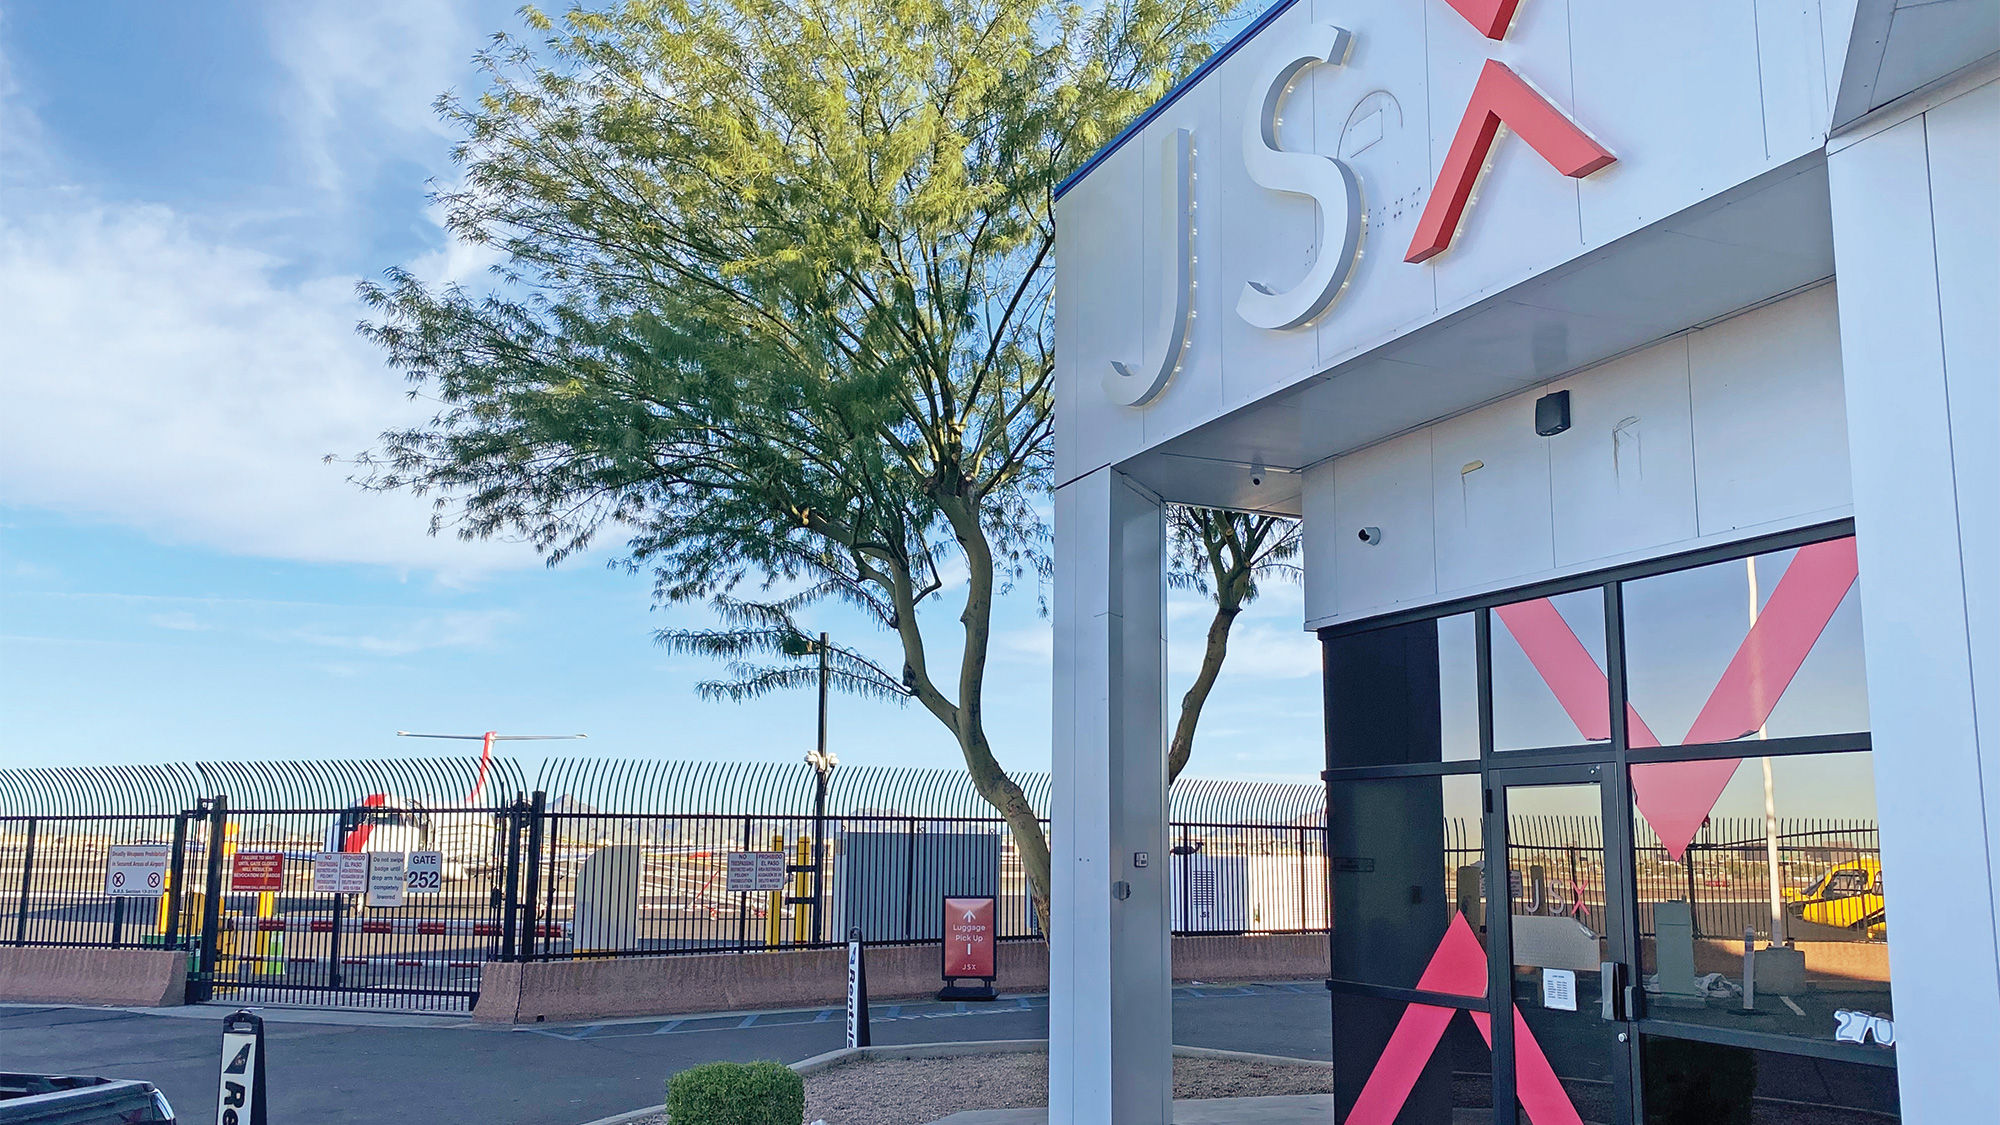 At Phoenix Sky Harbor Airport, JSX operates out of a private terminal.